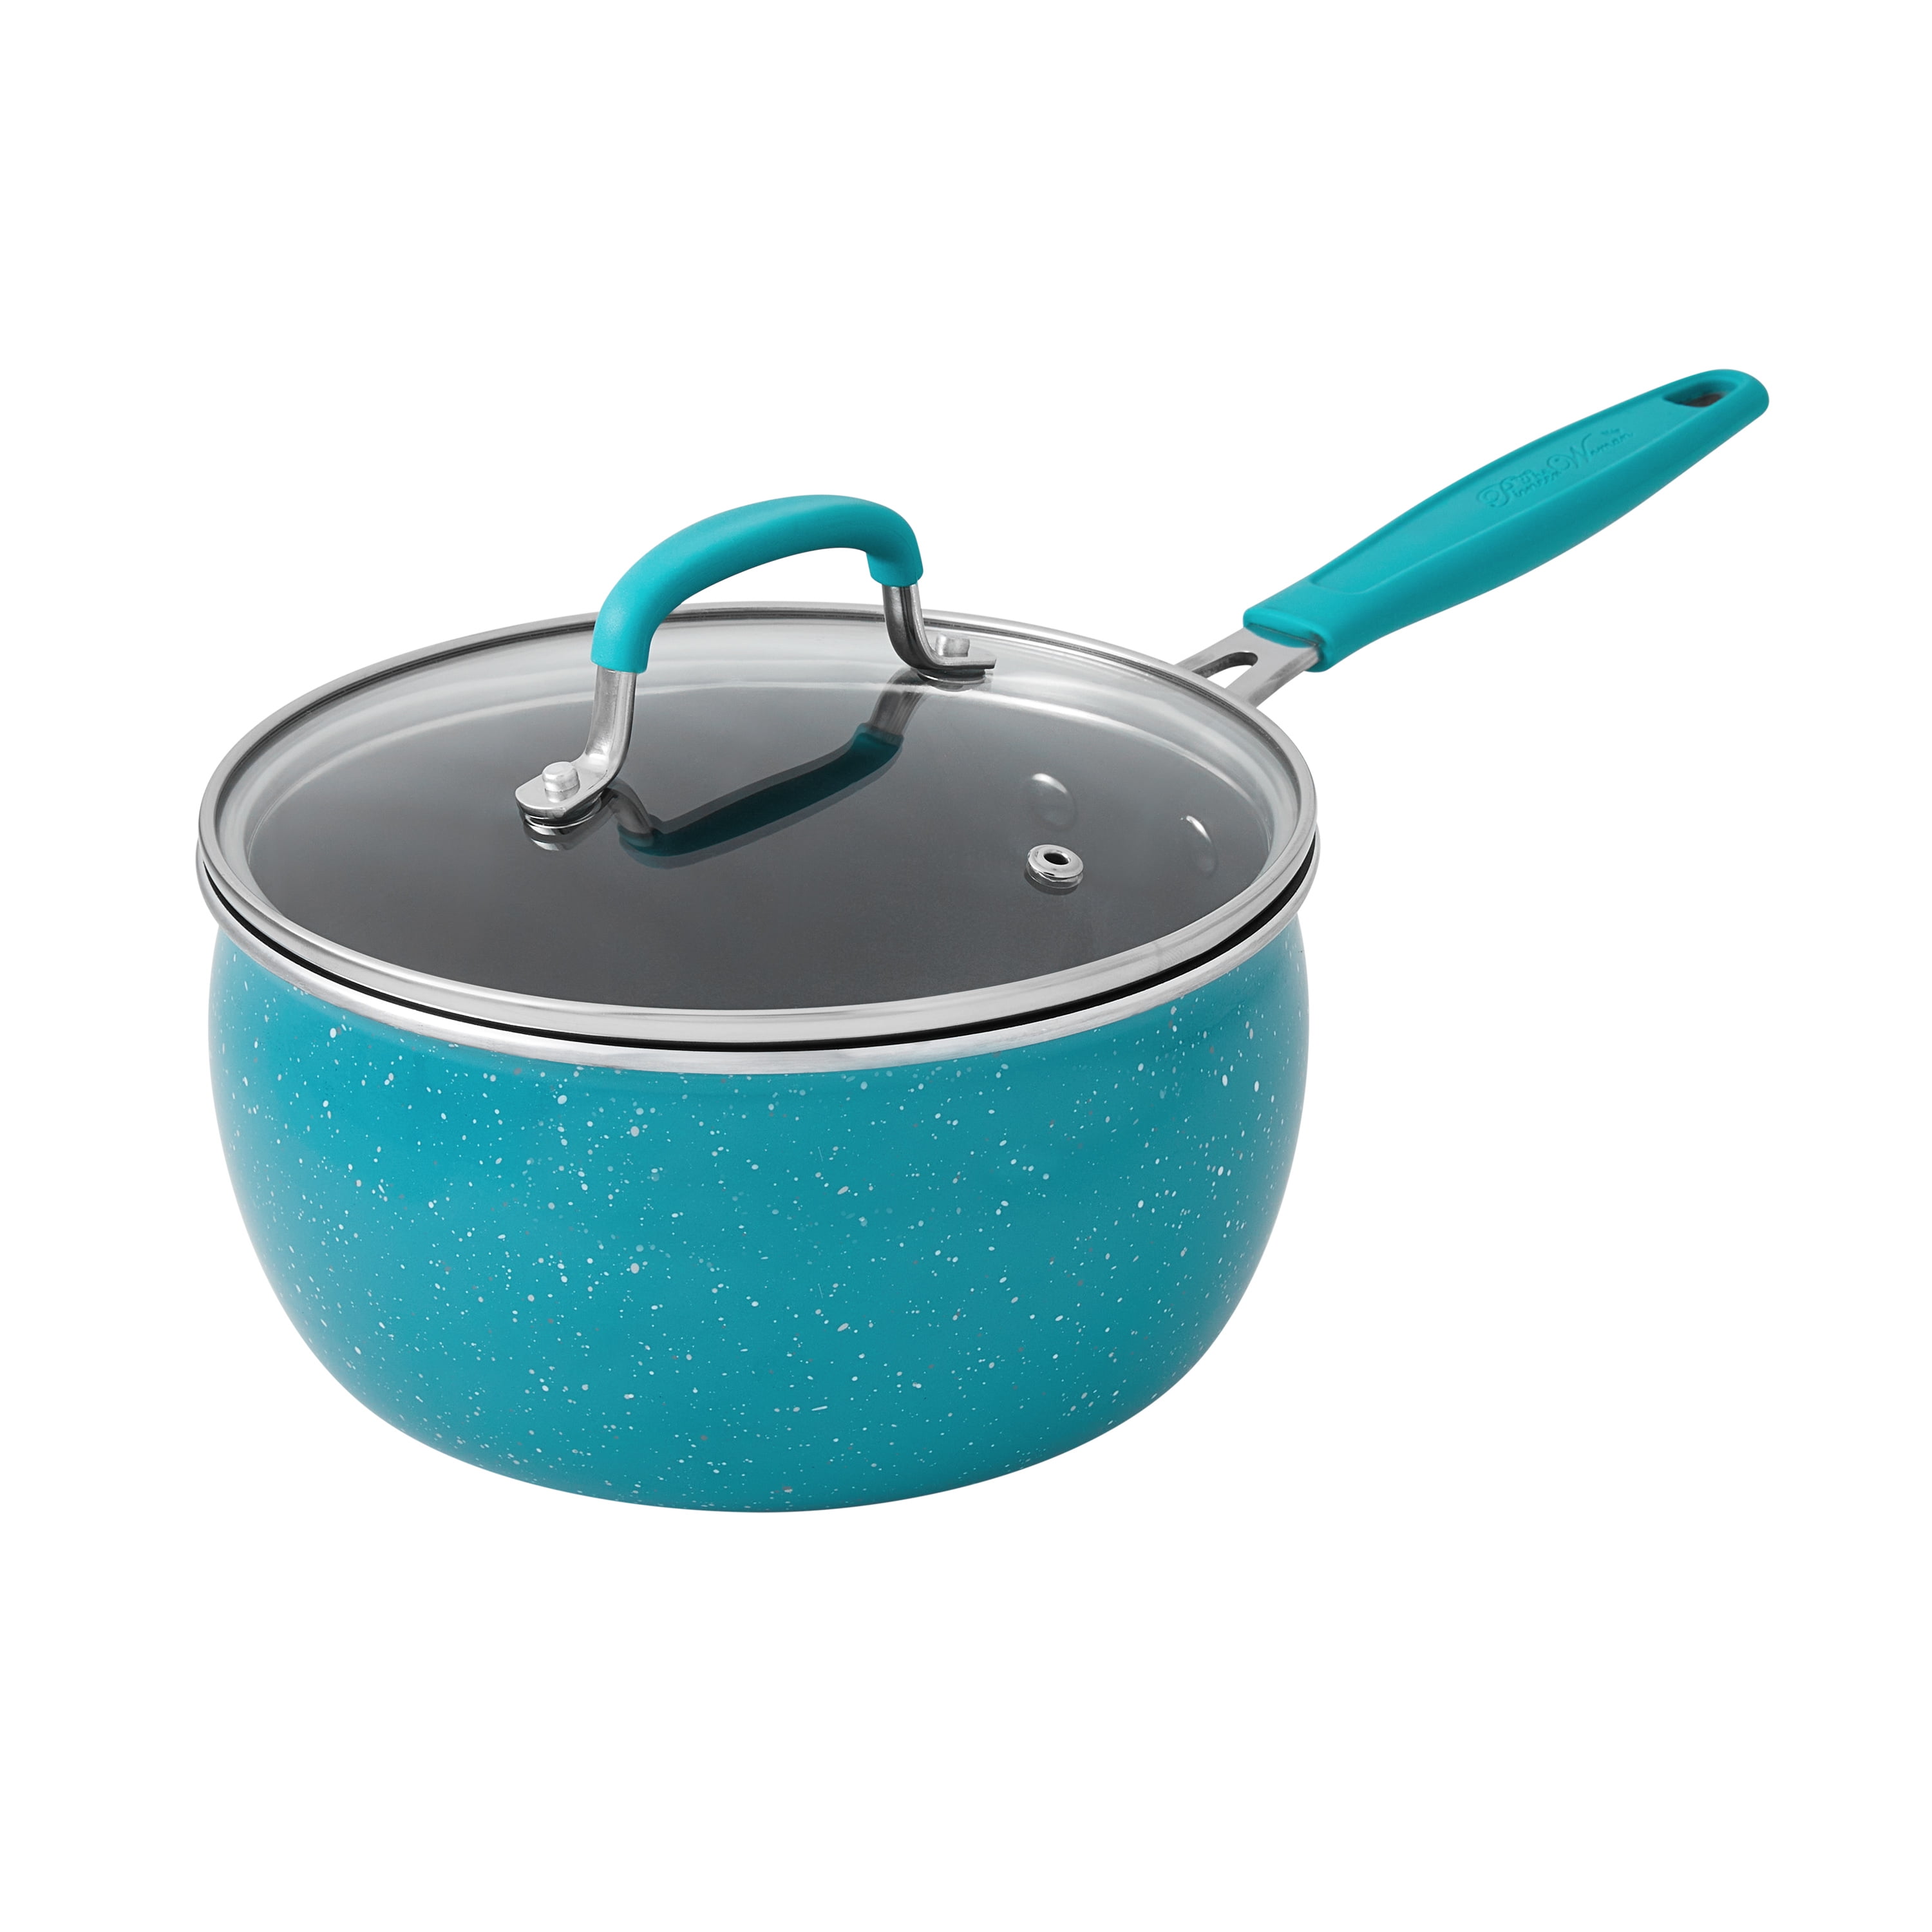 The Pioneer Woman, 10 Pieces Vintage Speckle Turquoise ,Porcelain Nonstick  Aluminum Cookware Set for Sale in Miami Beach, FL - OfferUp